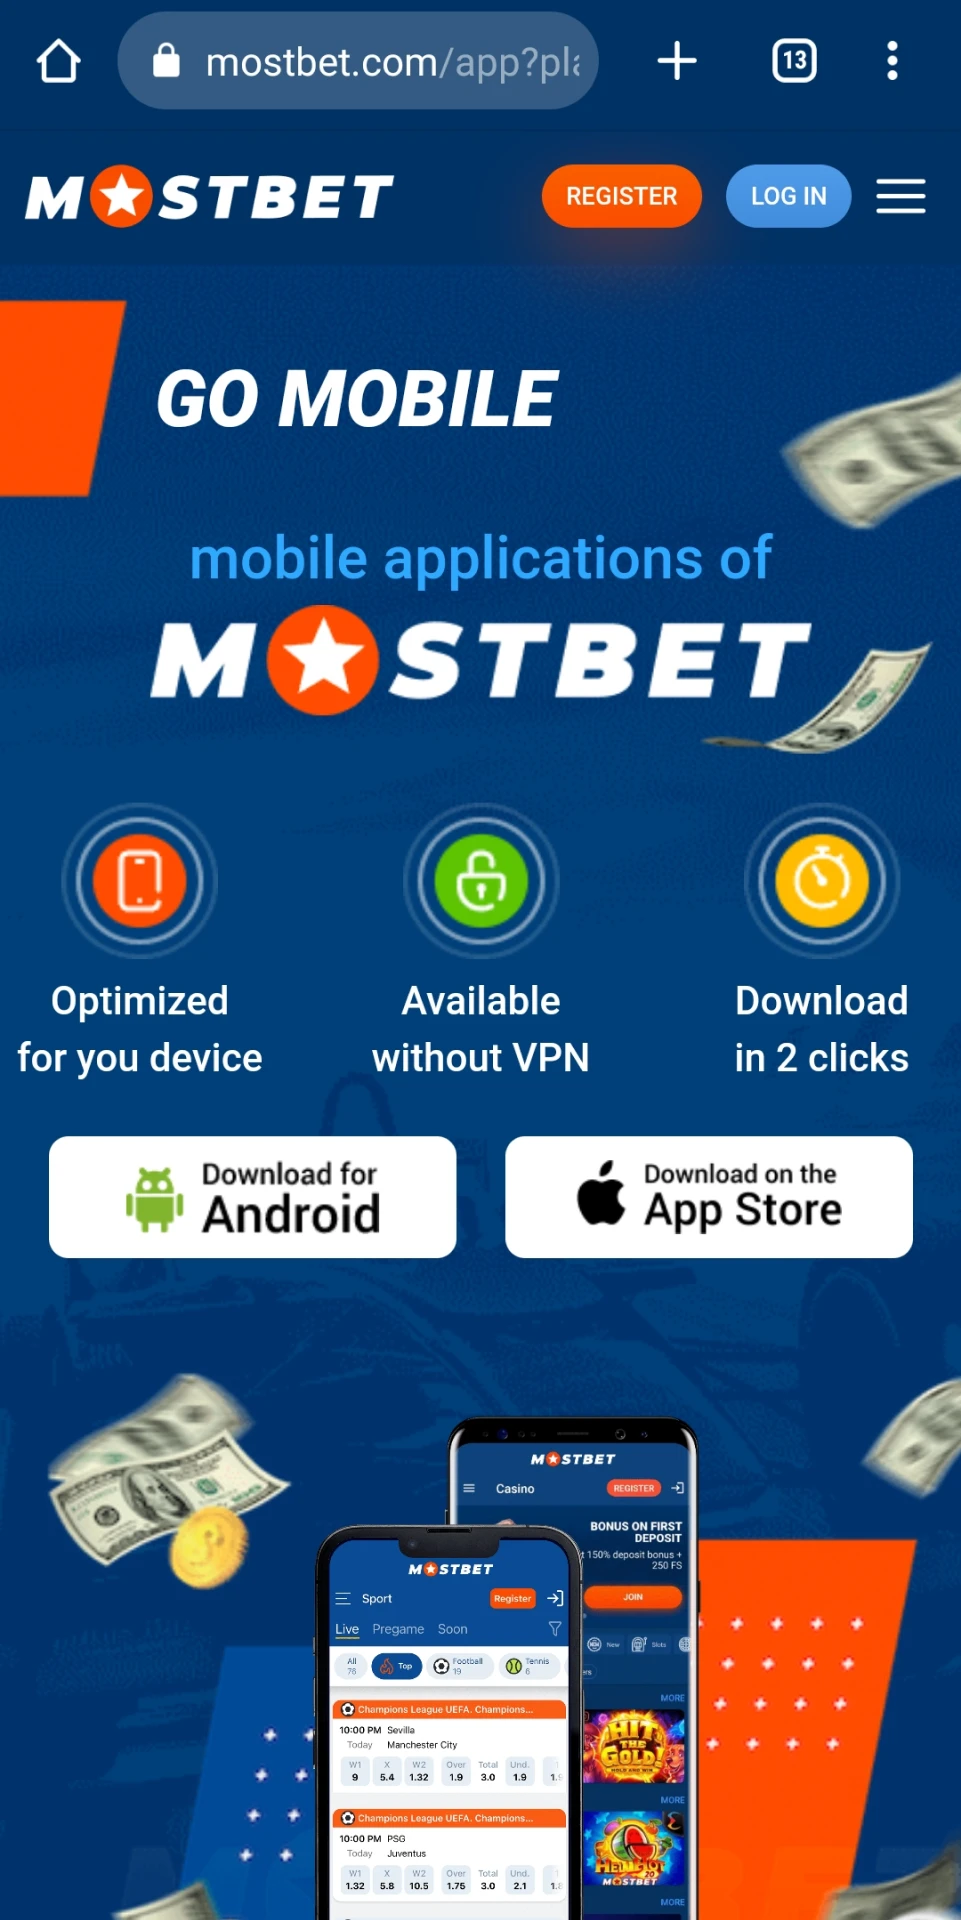 Download the Mostbet application to play Aviator on your android device.